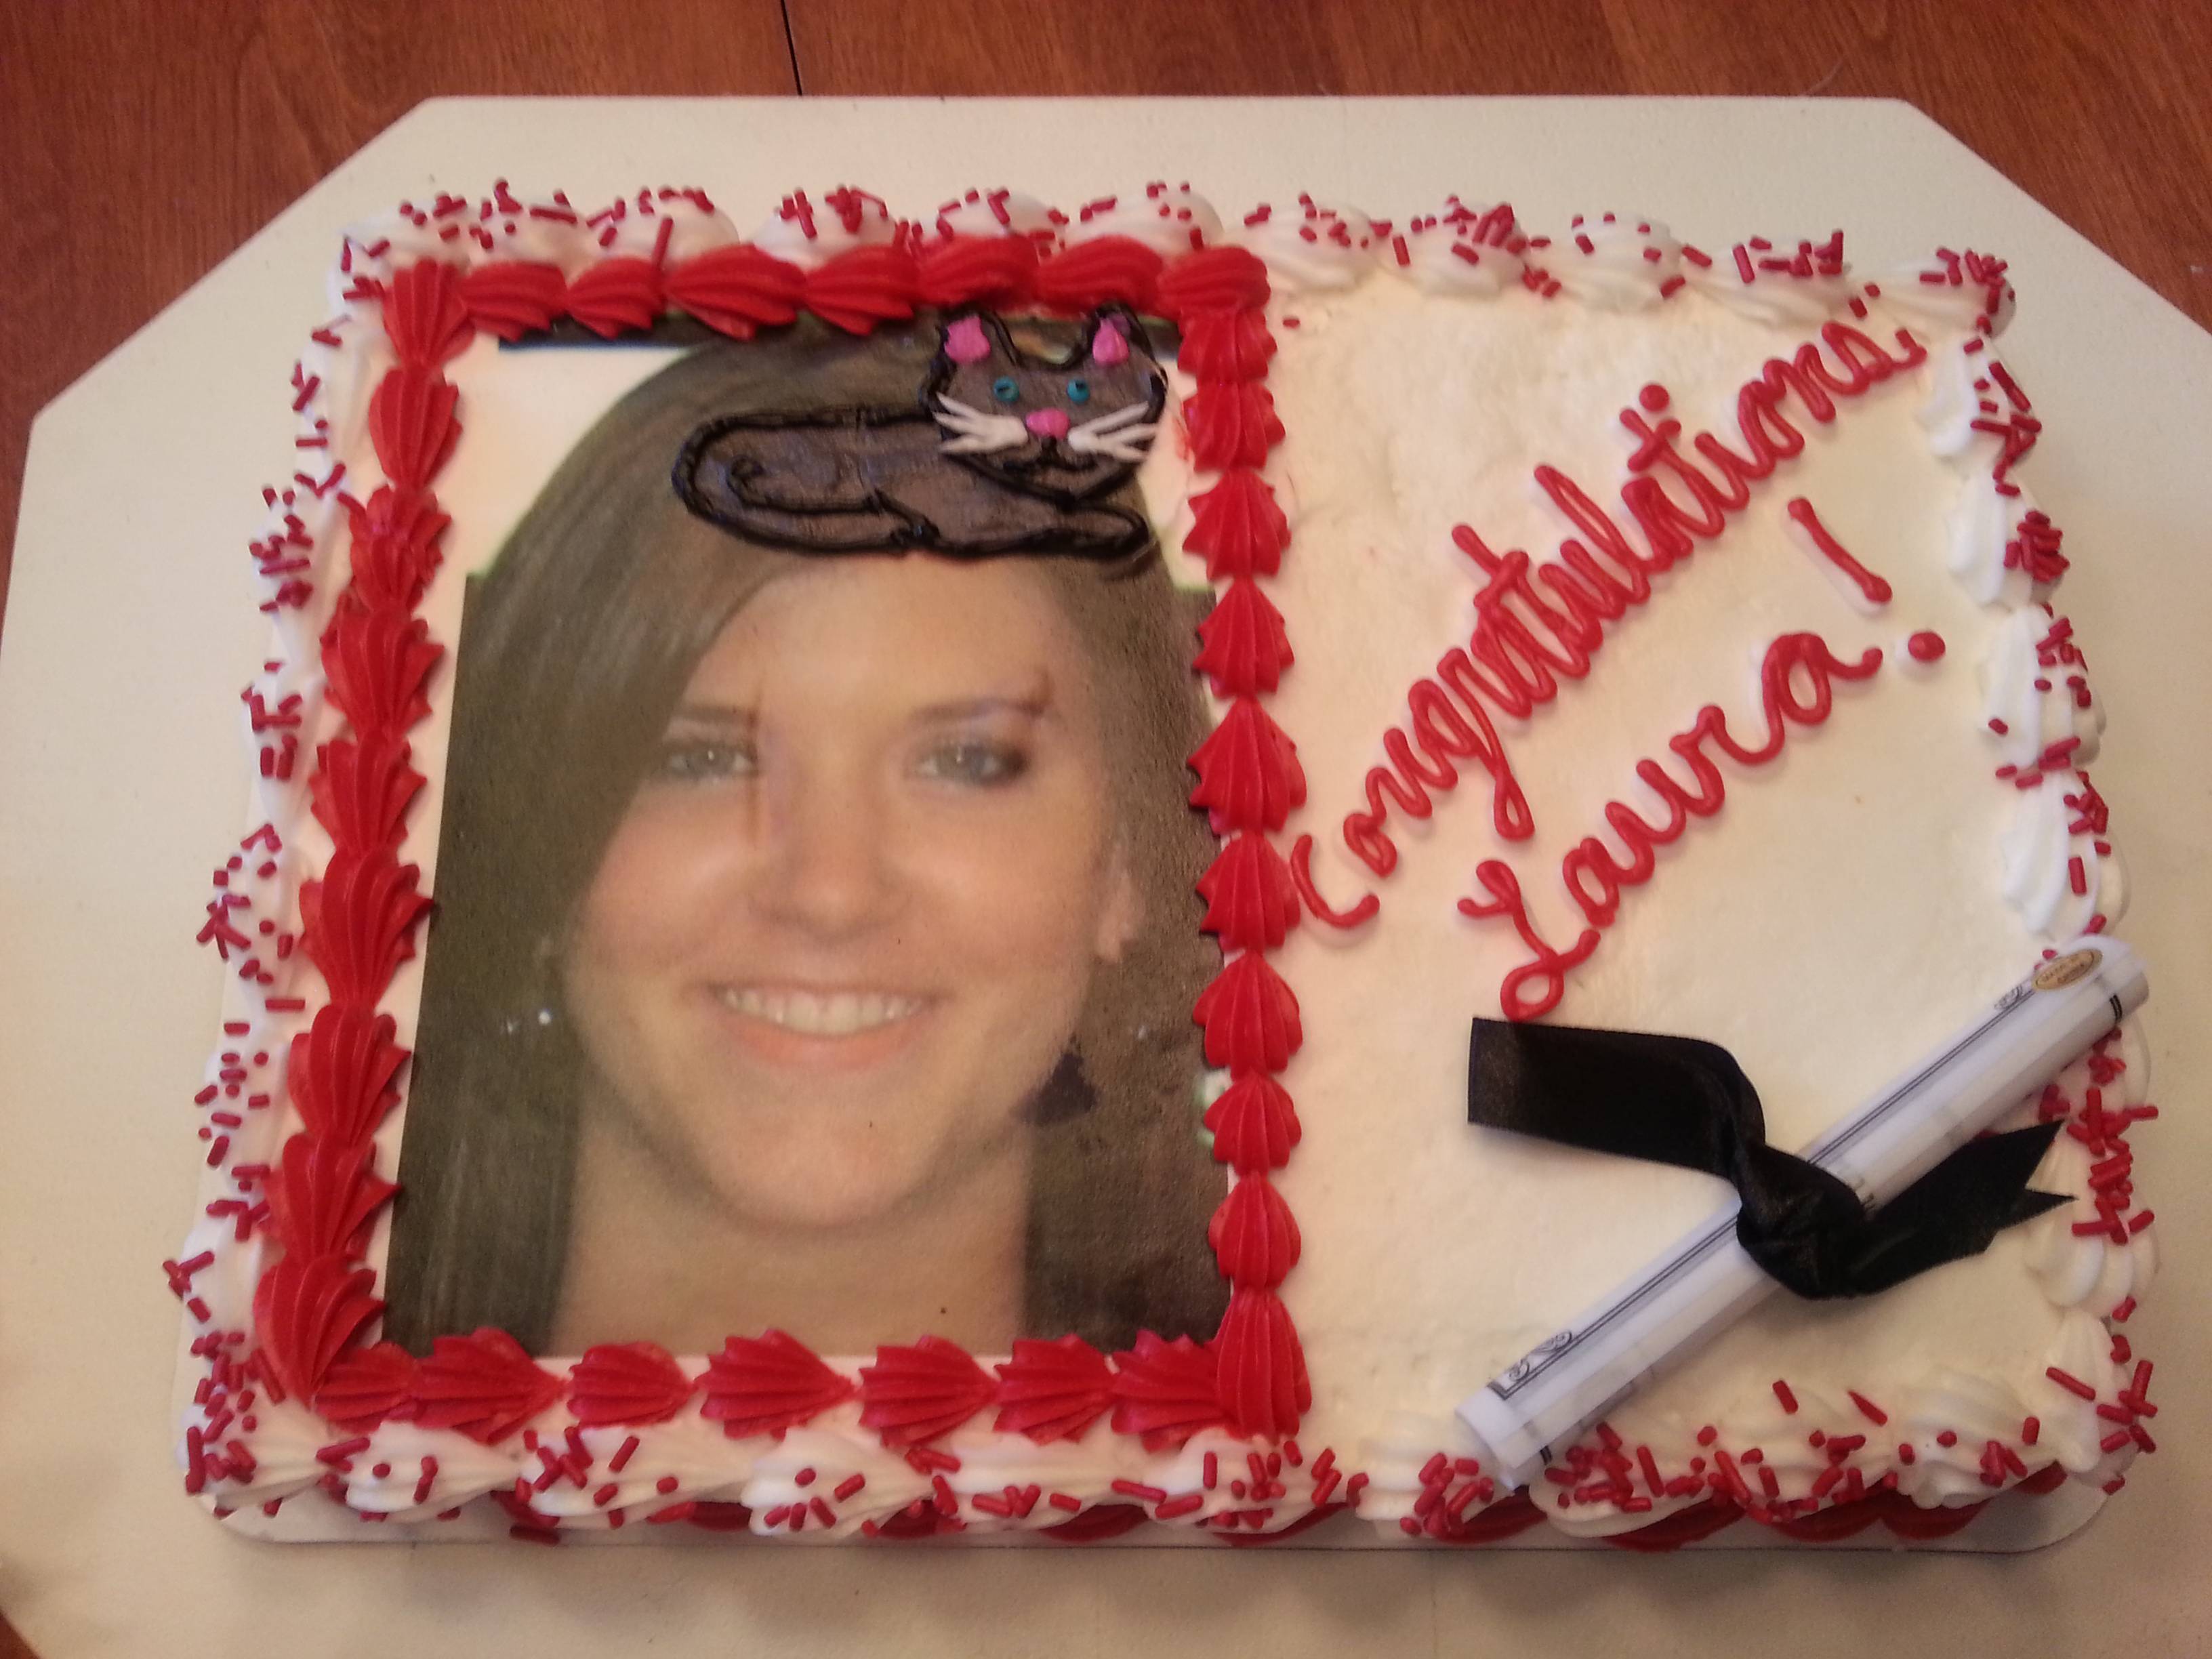 What are some hilarious messages to write on birthday cakes? - Quora